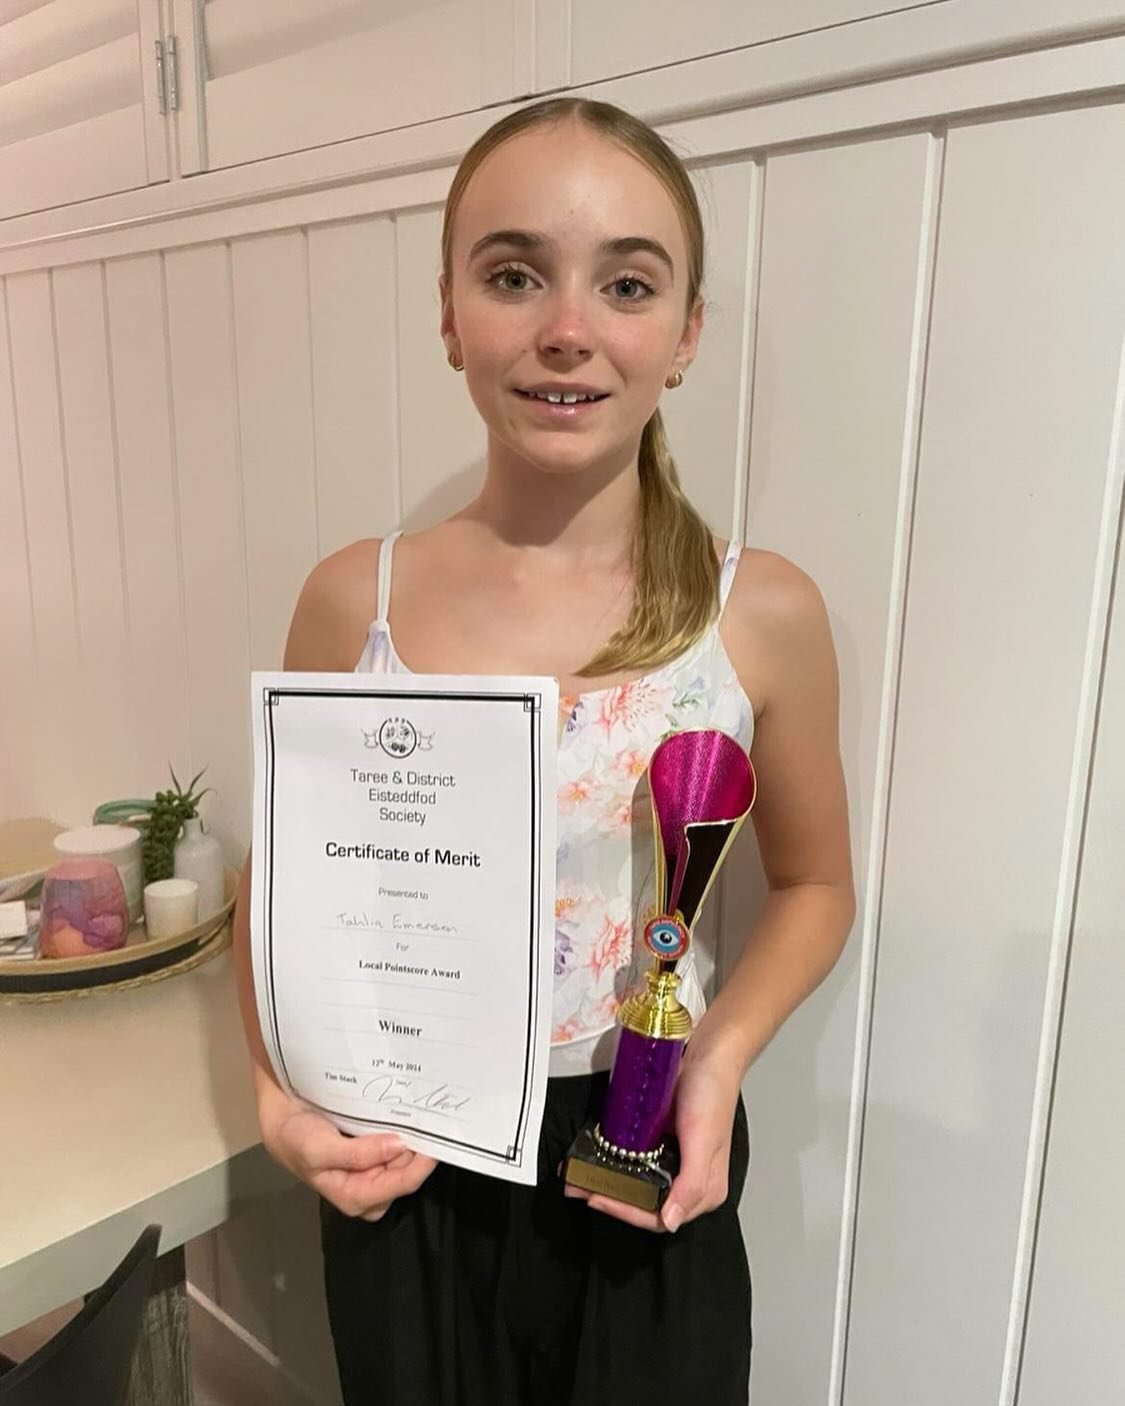 Another congratulations to our beautiful Tahlia, receiving the local point score award from The Taree and District Eisteddfod. This is awarded to the local competitor who gained the highest individual point score throughout the dance section of this 